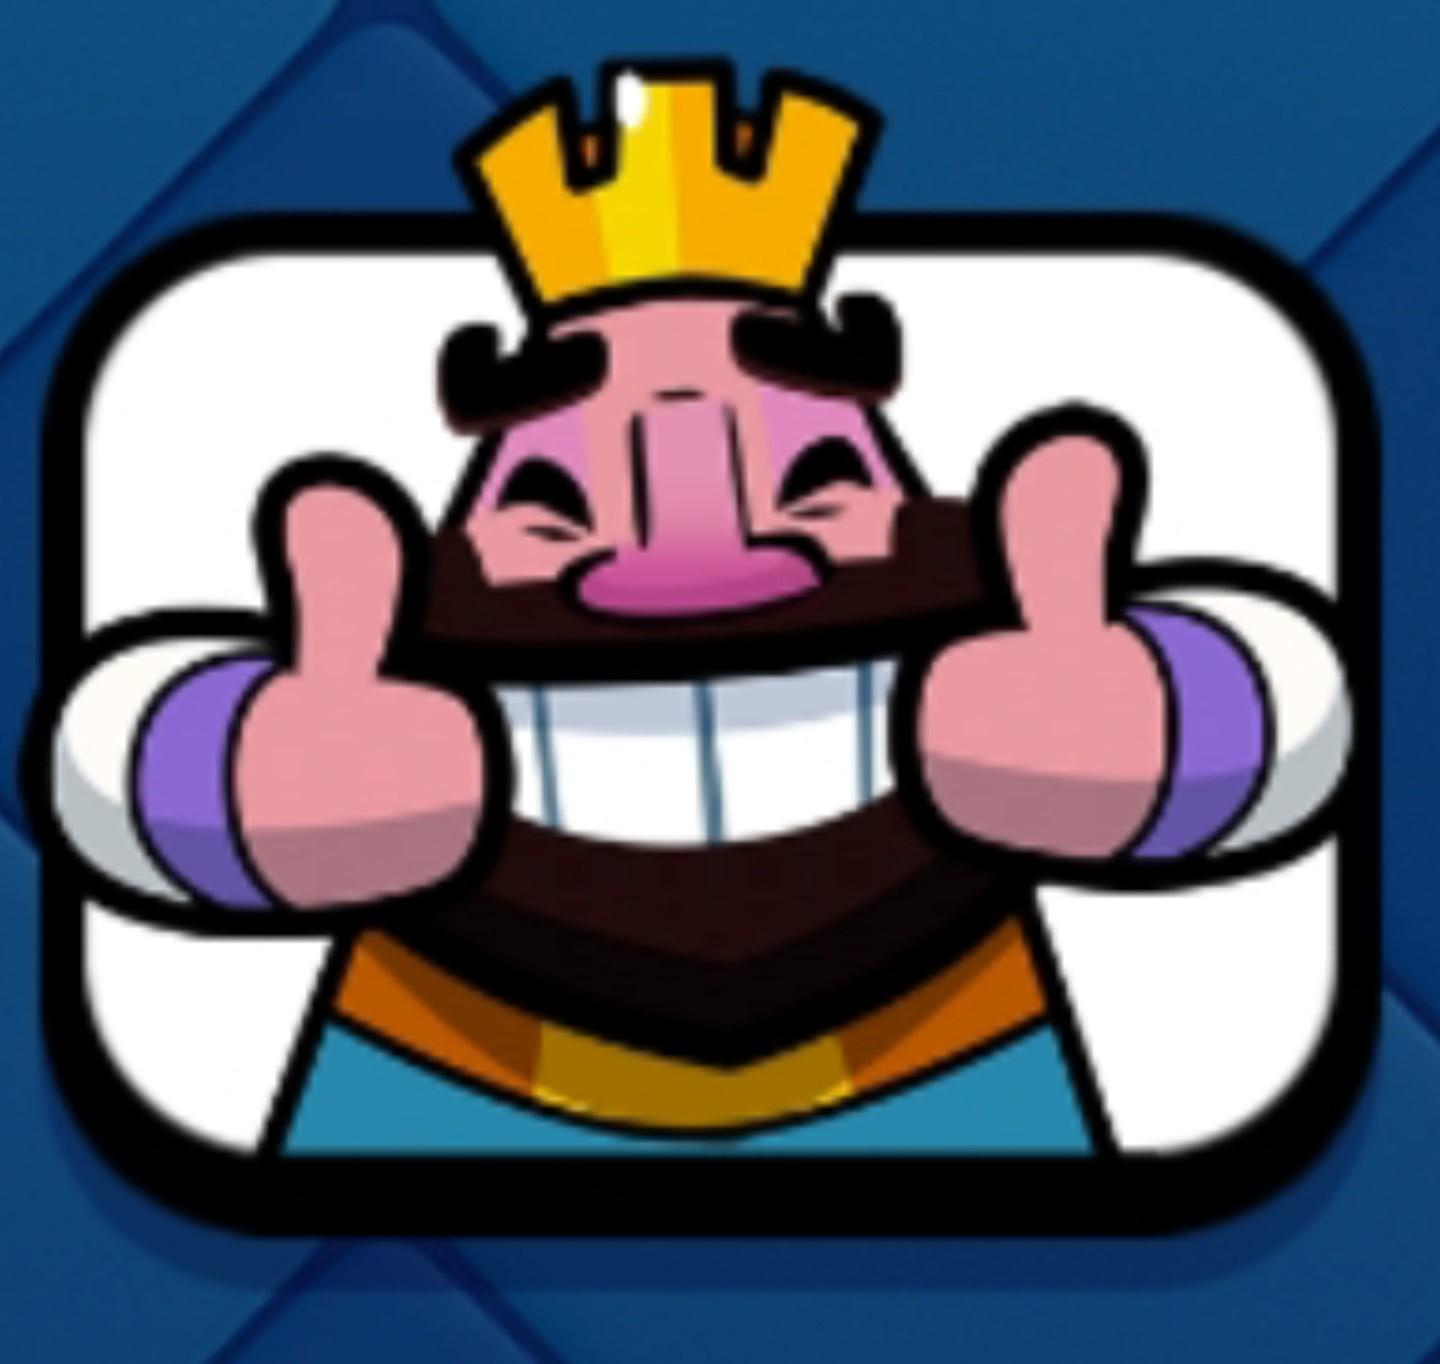 Clash Royale King laugh emote for 10 hours 